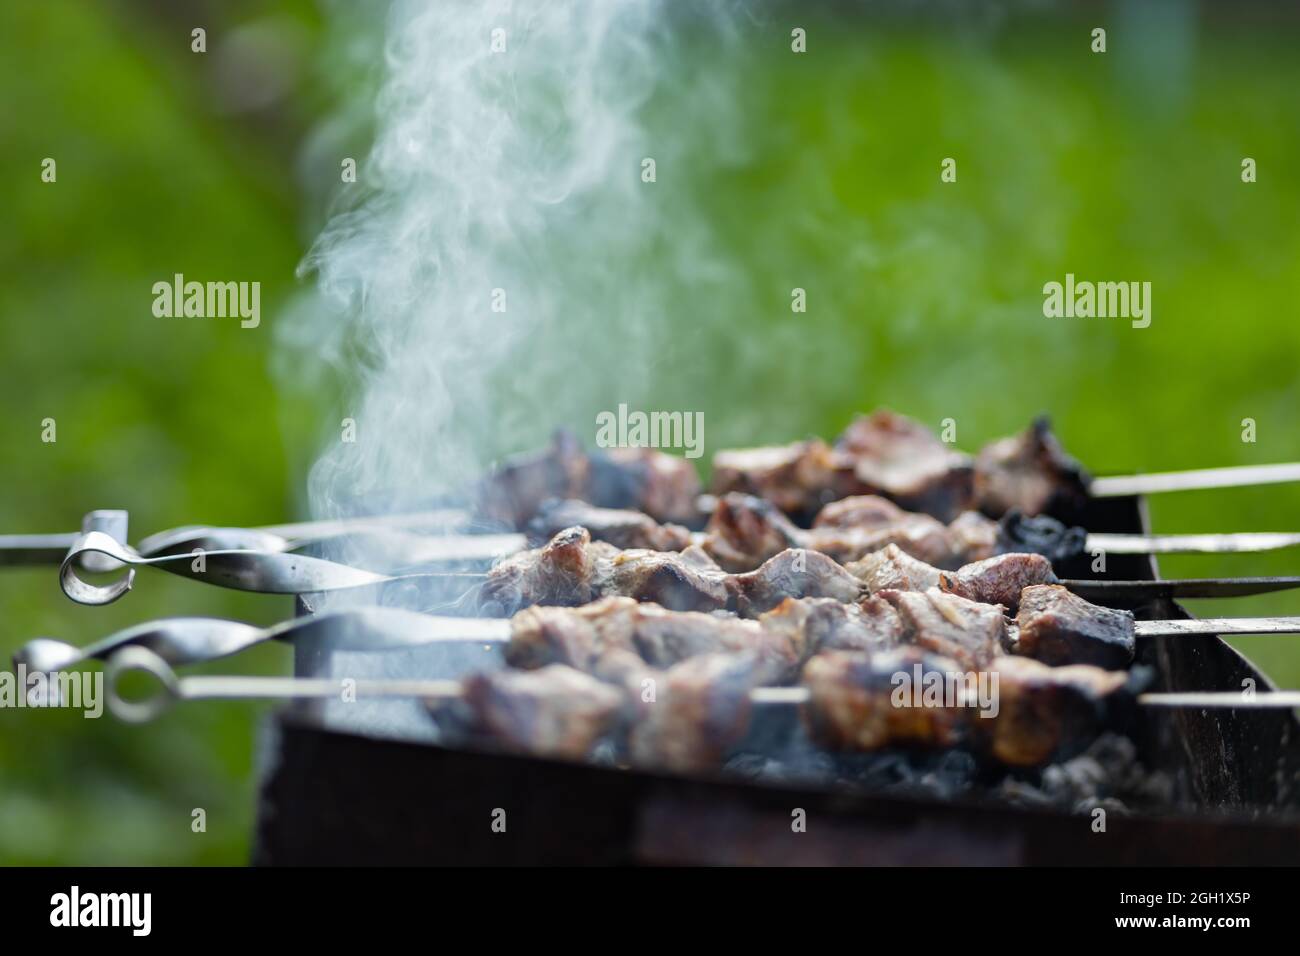 Barbecue meat on skewers. Cooking shashlik on the mangal in nature. Grilled kebab cooking on metal skewer. Home picnic Stock Photo